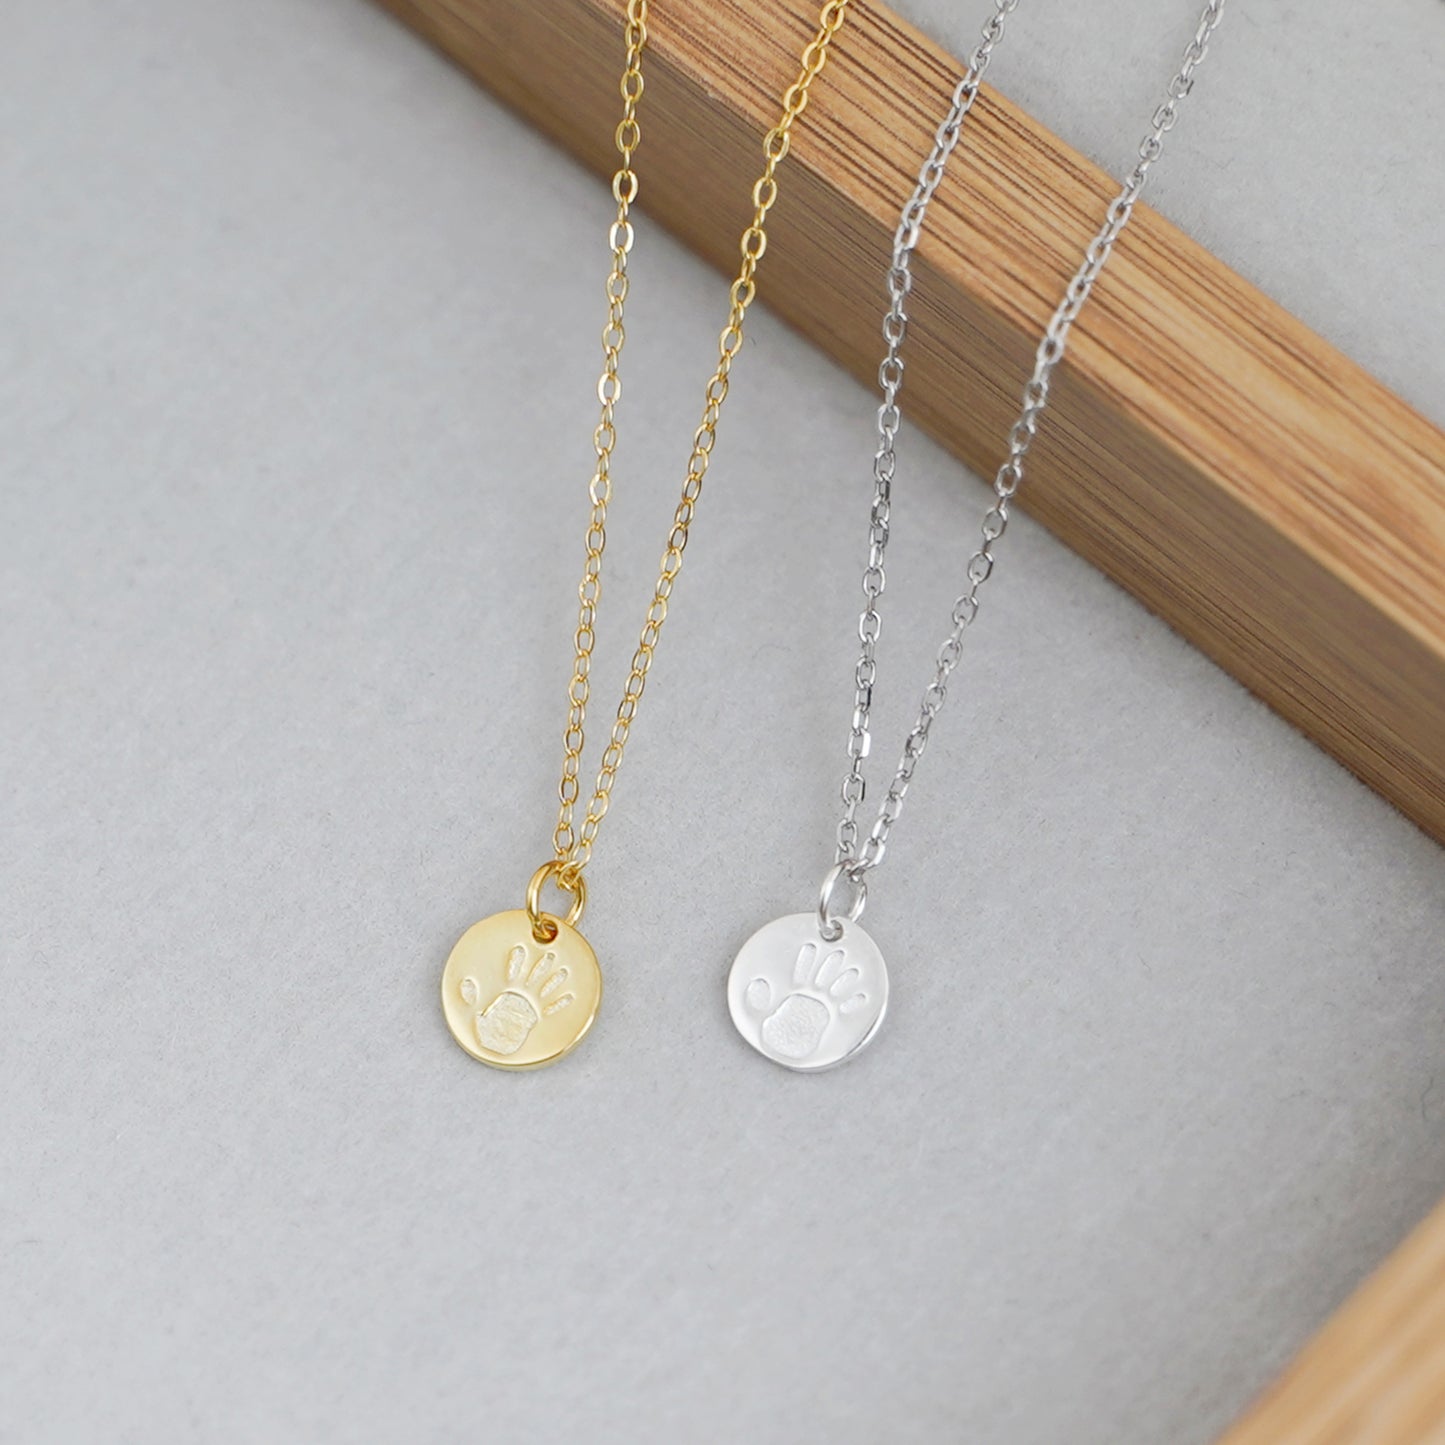 Sterling Silver Disc Pendant with Engraved Handprint or Footprint - sugarkittenlondon